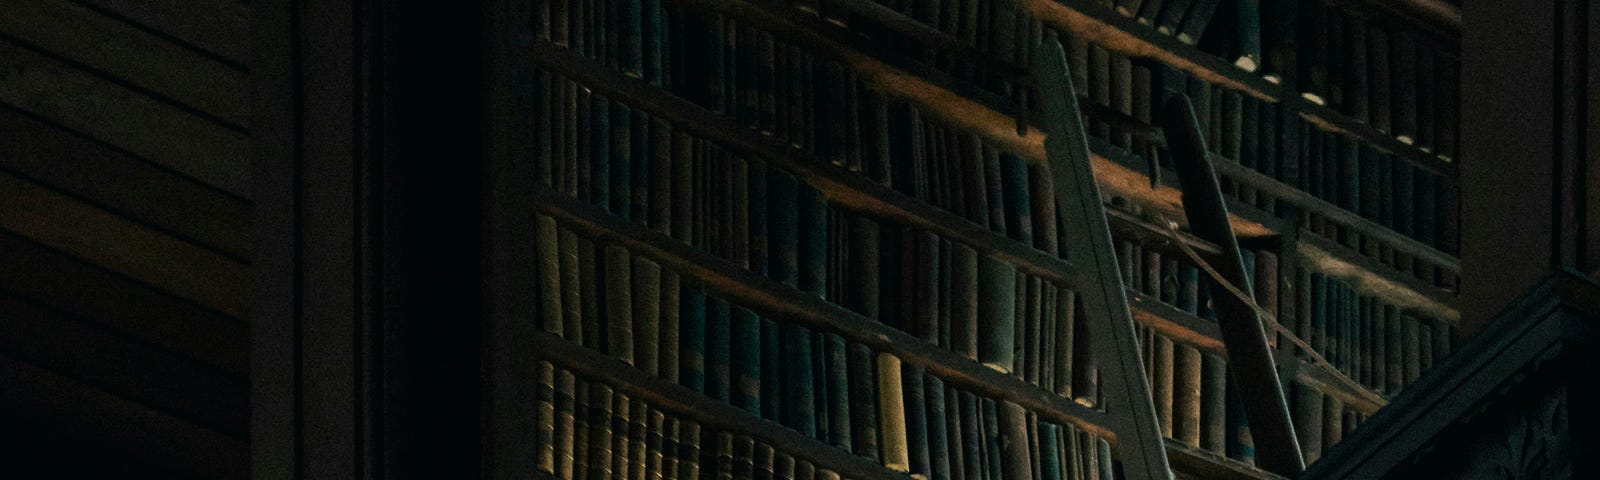 View looking up at a floor-to-ceiling bay of shelves in a very old and dark library, full of dusty and leatherbound tomes, lit only from below. The top of a ladder used to reach the upper shelves can also be seen.